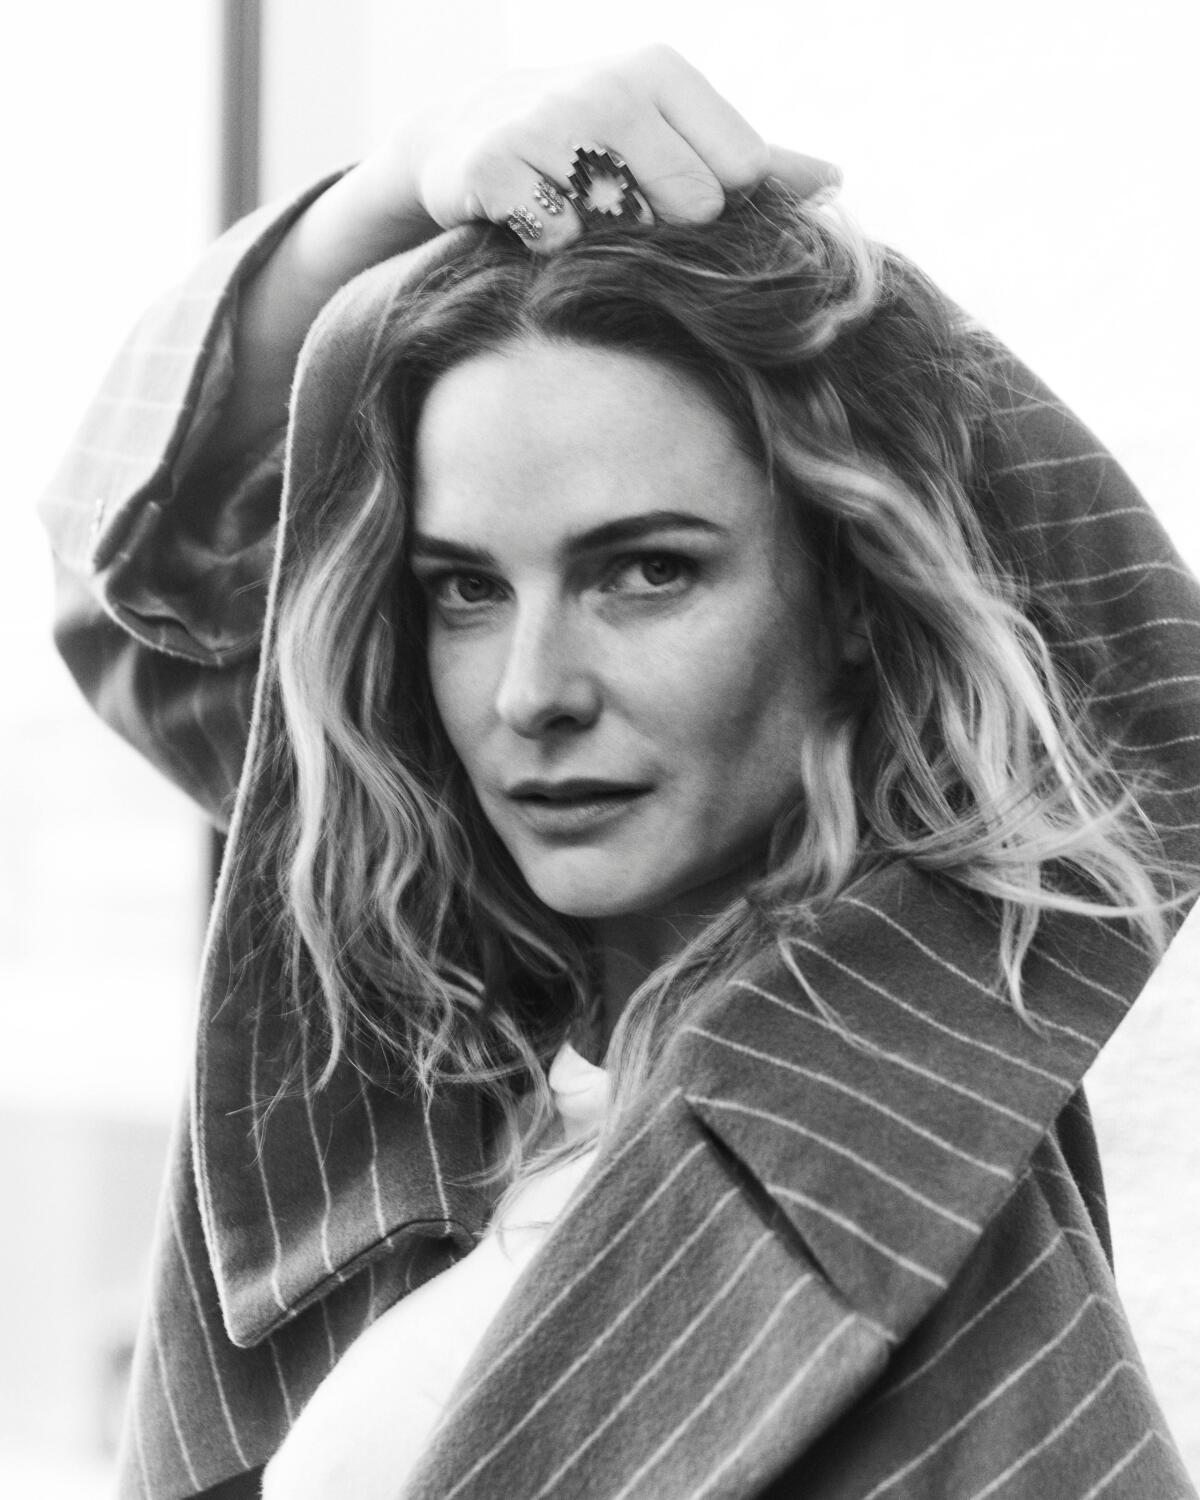 In a black-and-white portrait, Rebecca Ferguson pulls her jacket up around her head.